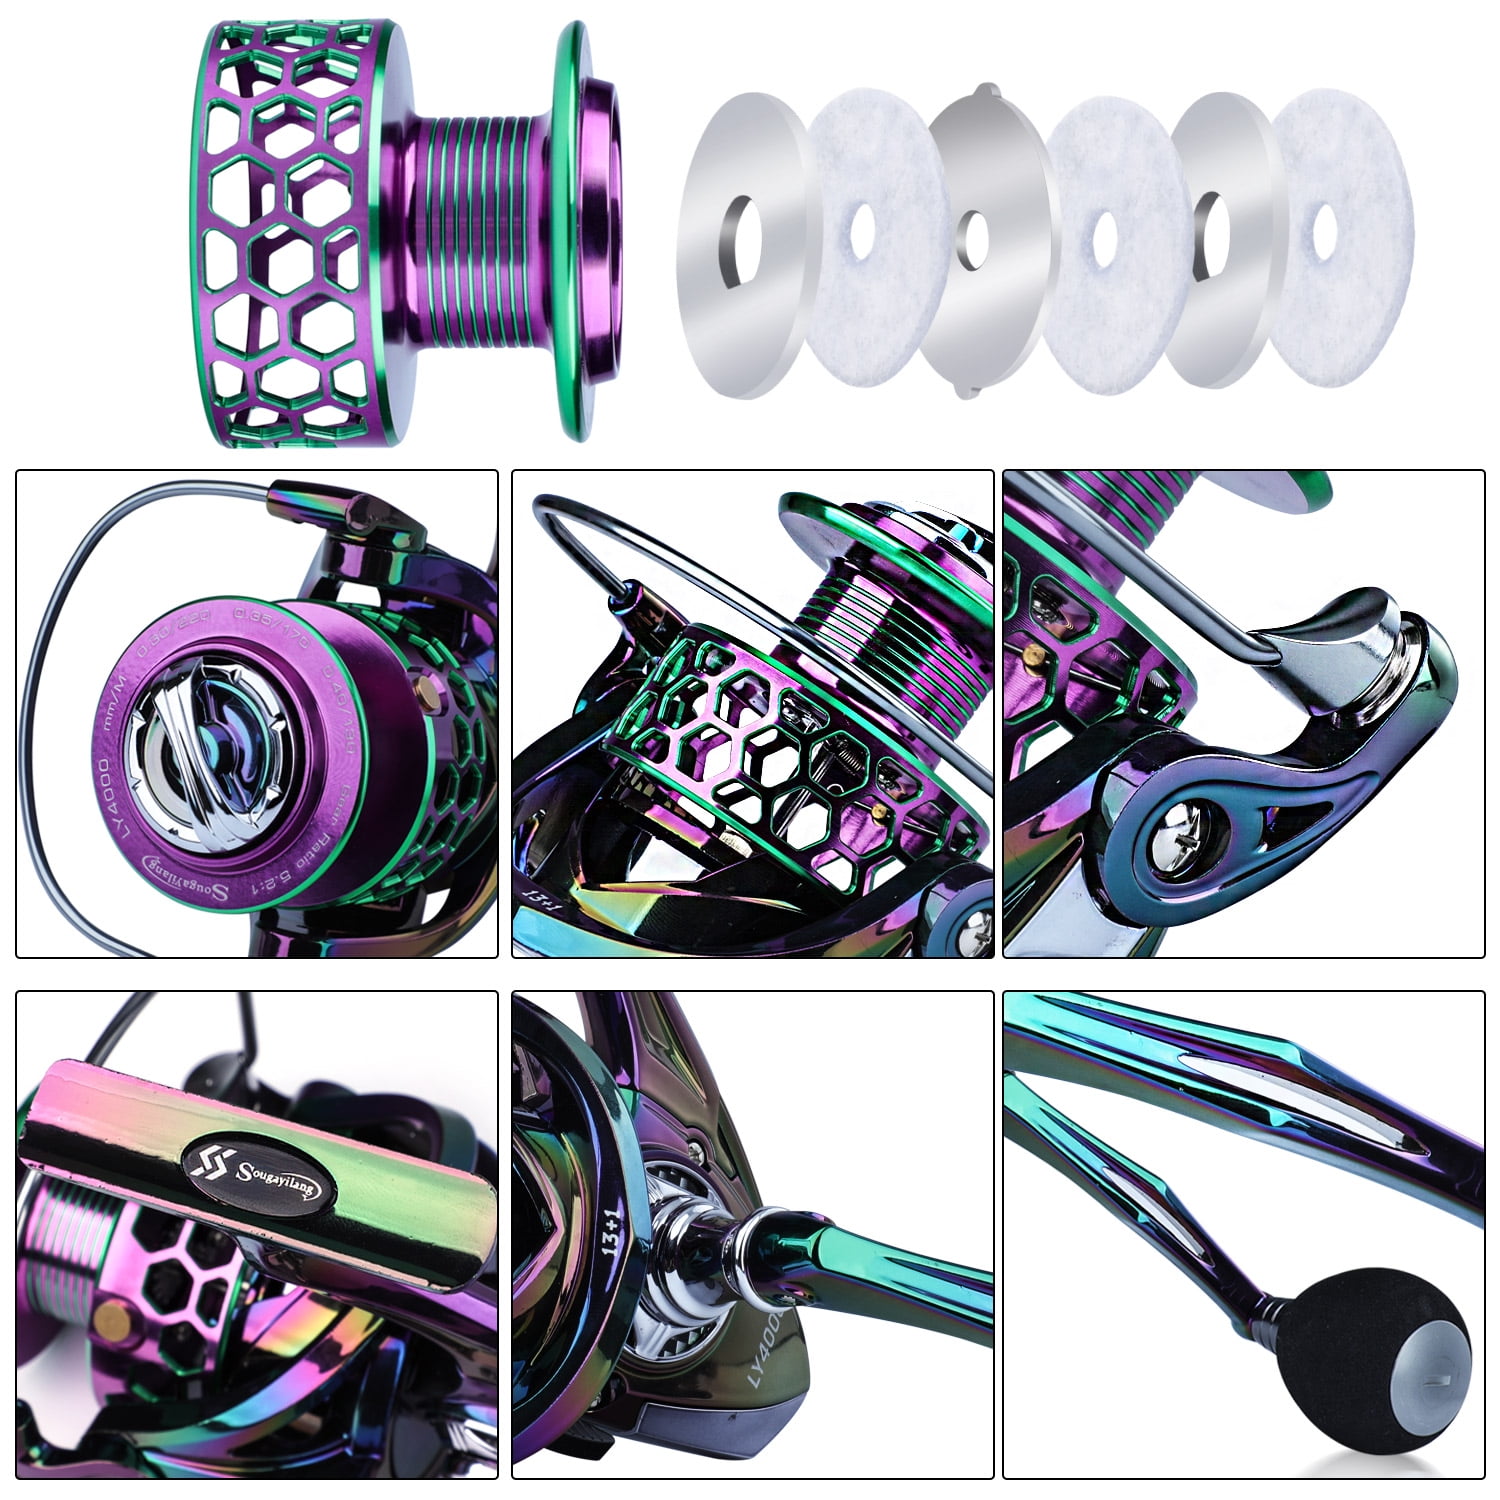 SALE]Sougayilang Colorful Fishing Reel 13 +1 BB Light Weight Ultra Smooth  Powerful Spinning Reels 